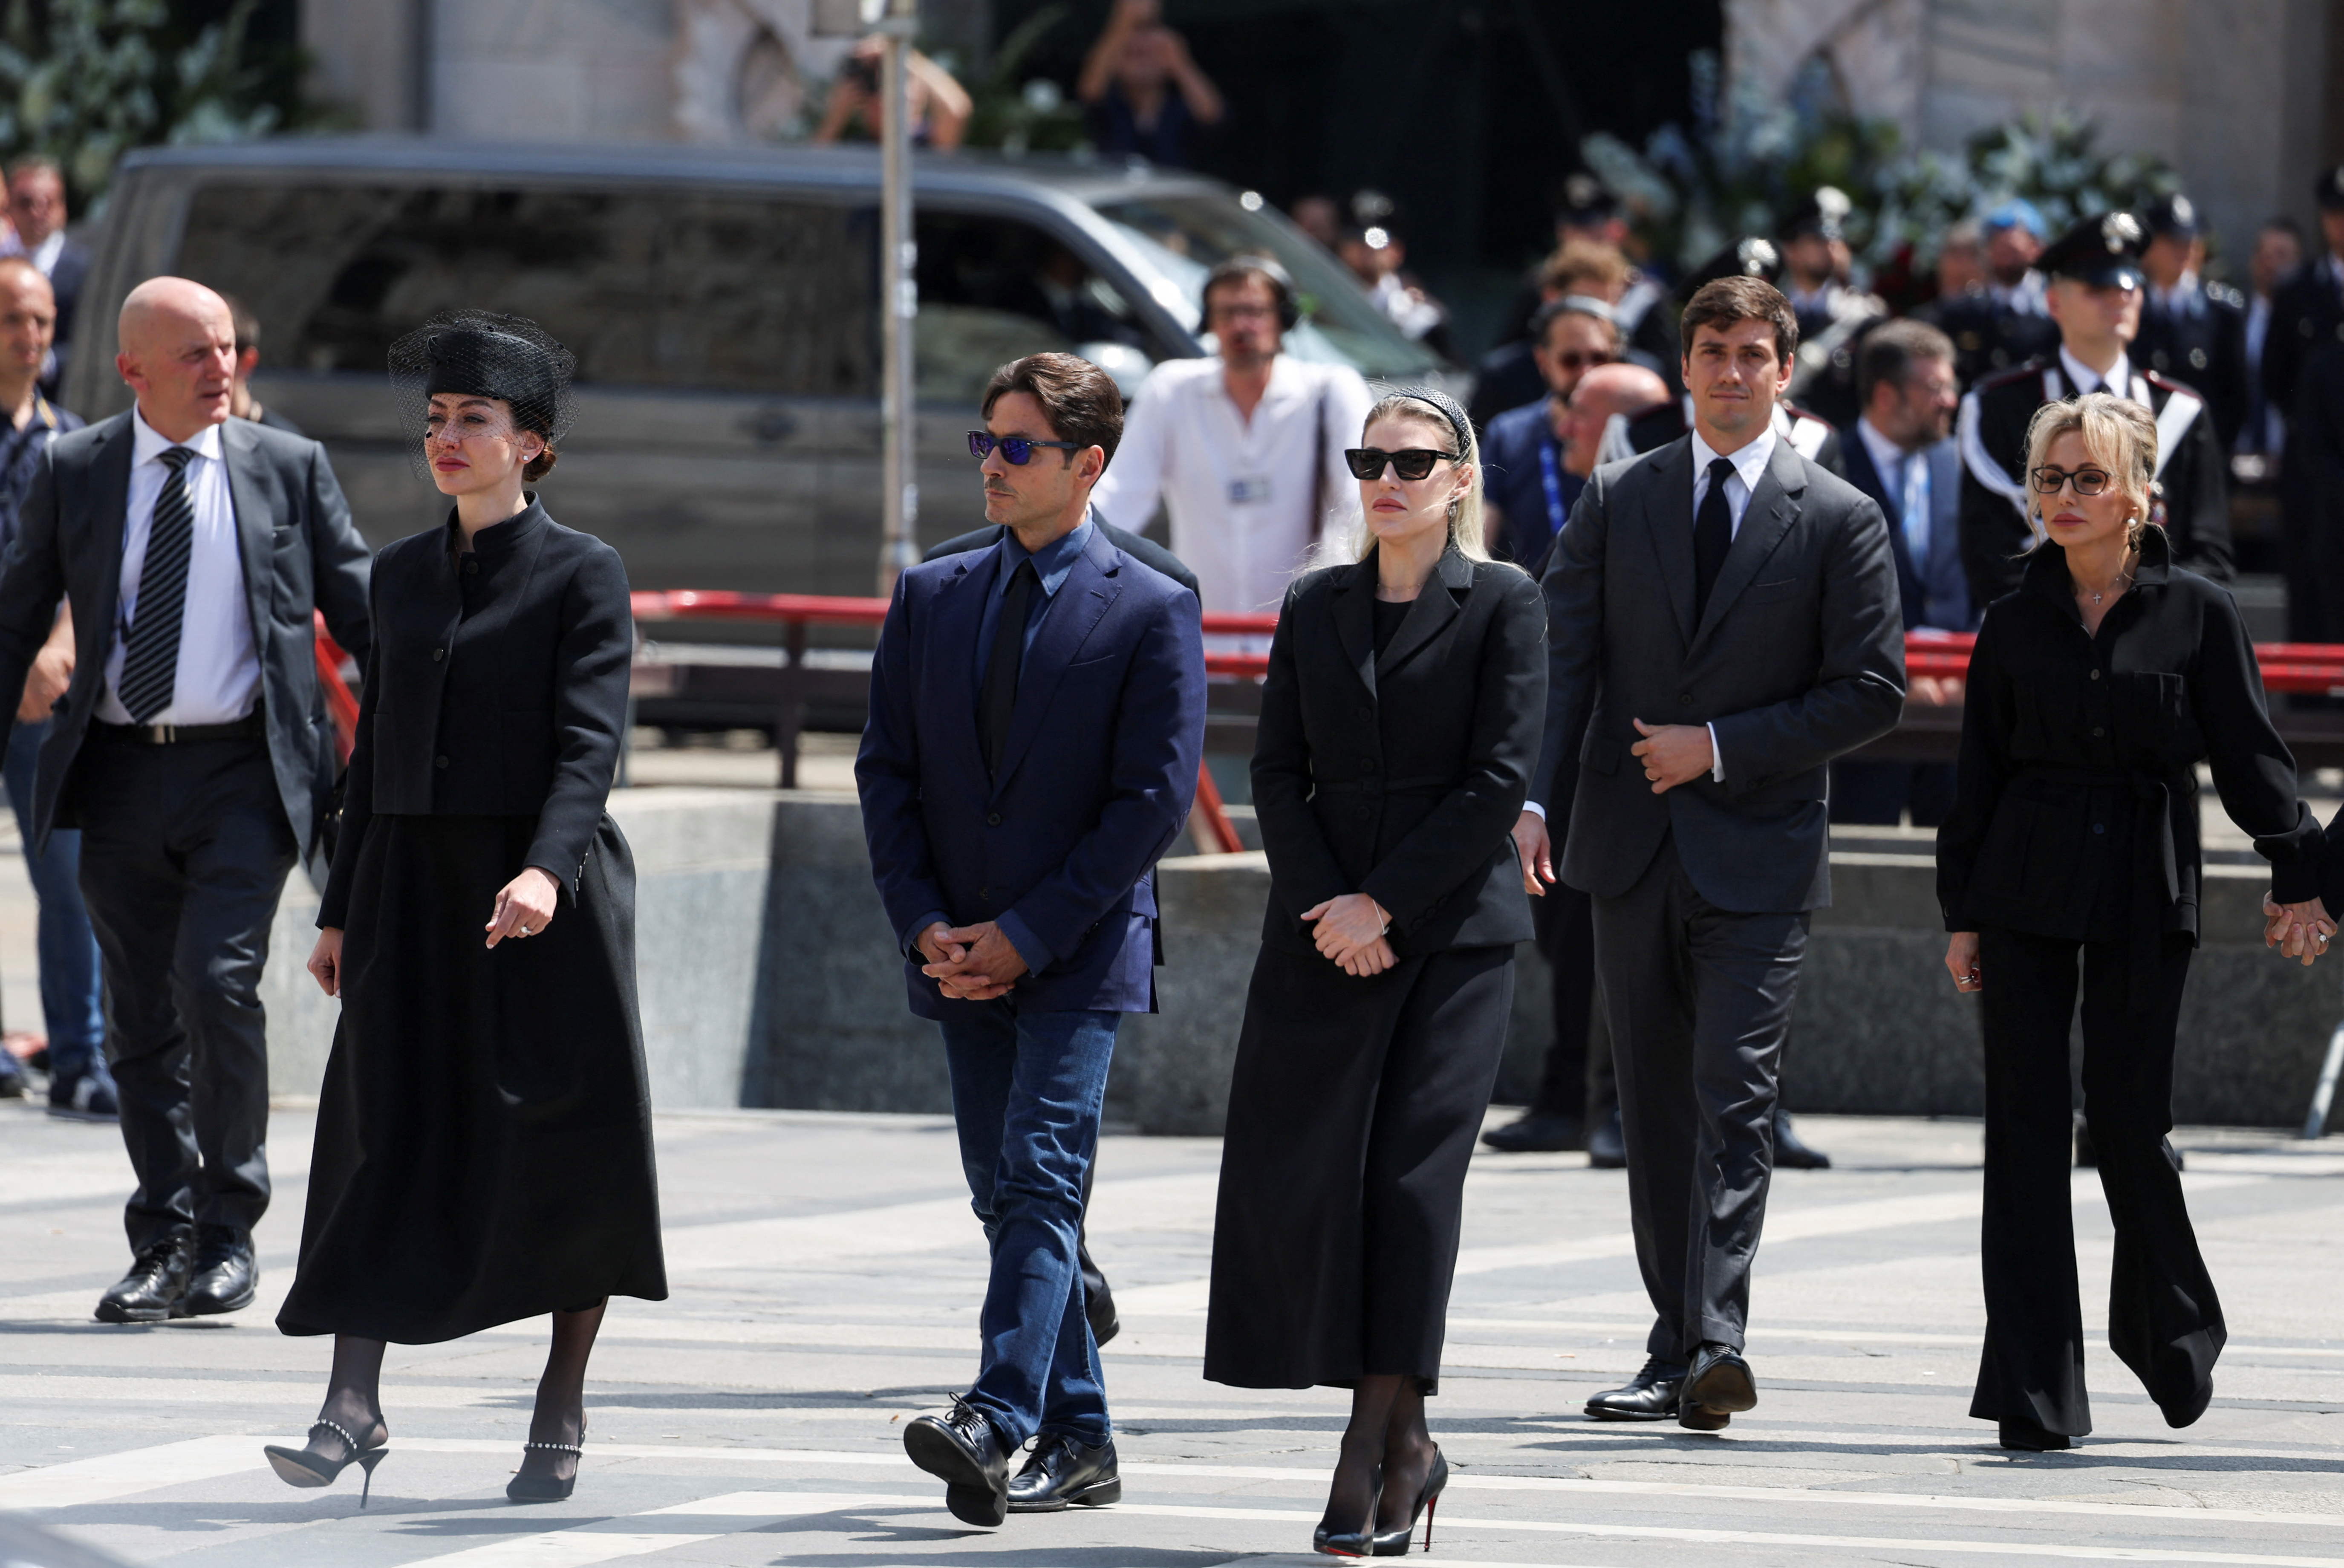 Funeral of former Italian Prime Minister Silvio Berlusconi at the Duomo Cathedral, in Milan